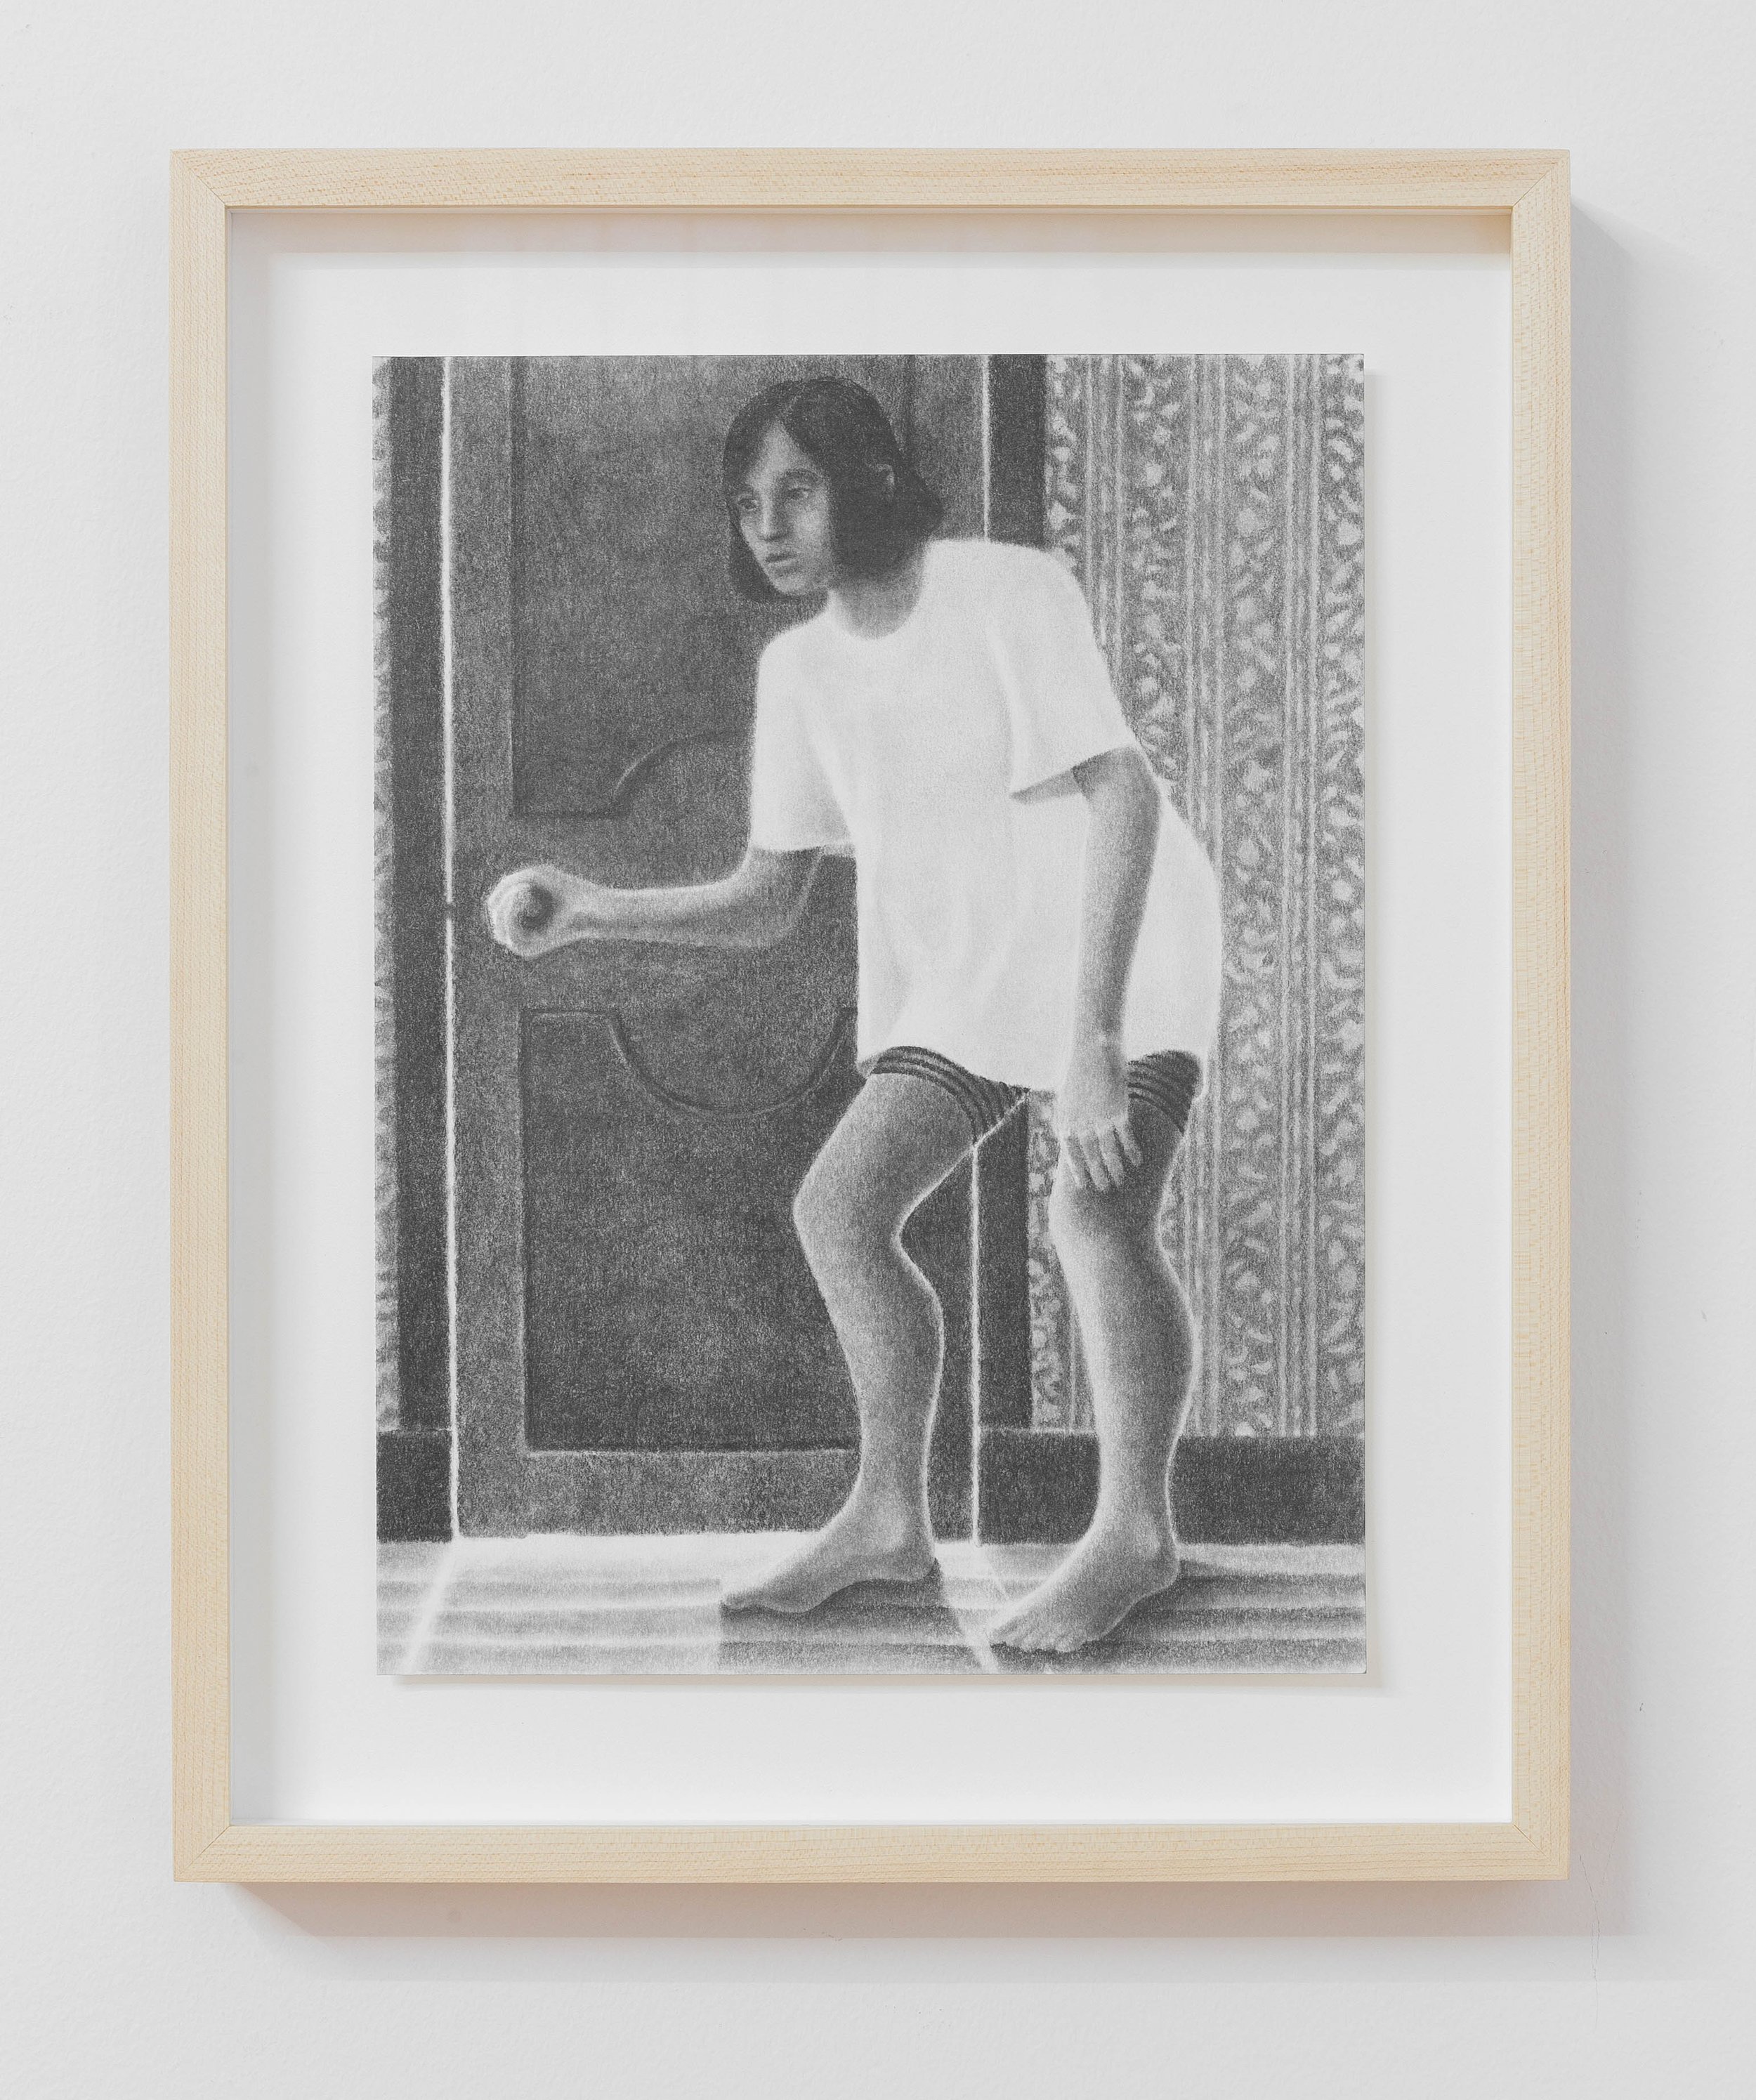 Pangée_RussellBanx_At the Door(2022)_Graphite sur papier:Graphiteonpaper_15x12inches .jpg